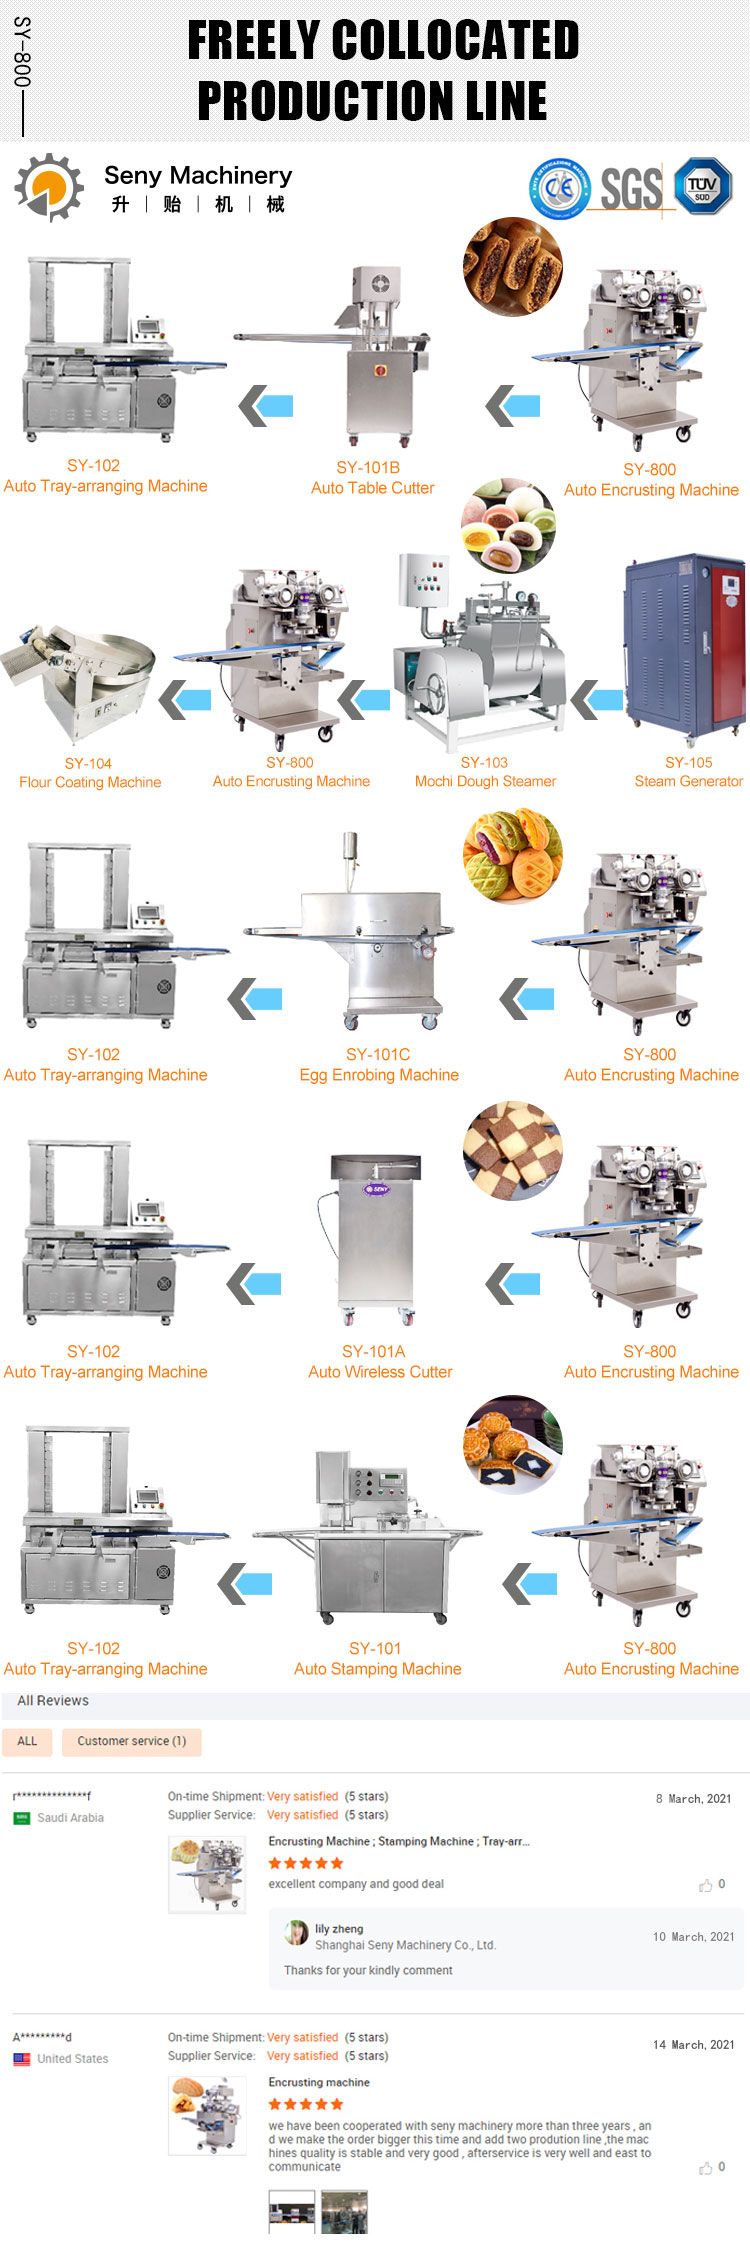 Automatic Filled Twist Cookie Biscuit Fig Bar Making Process Machine